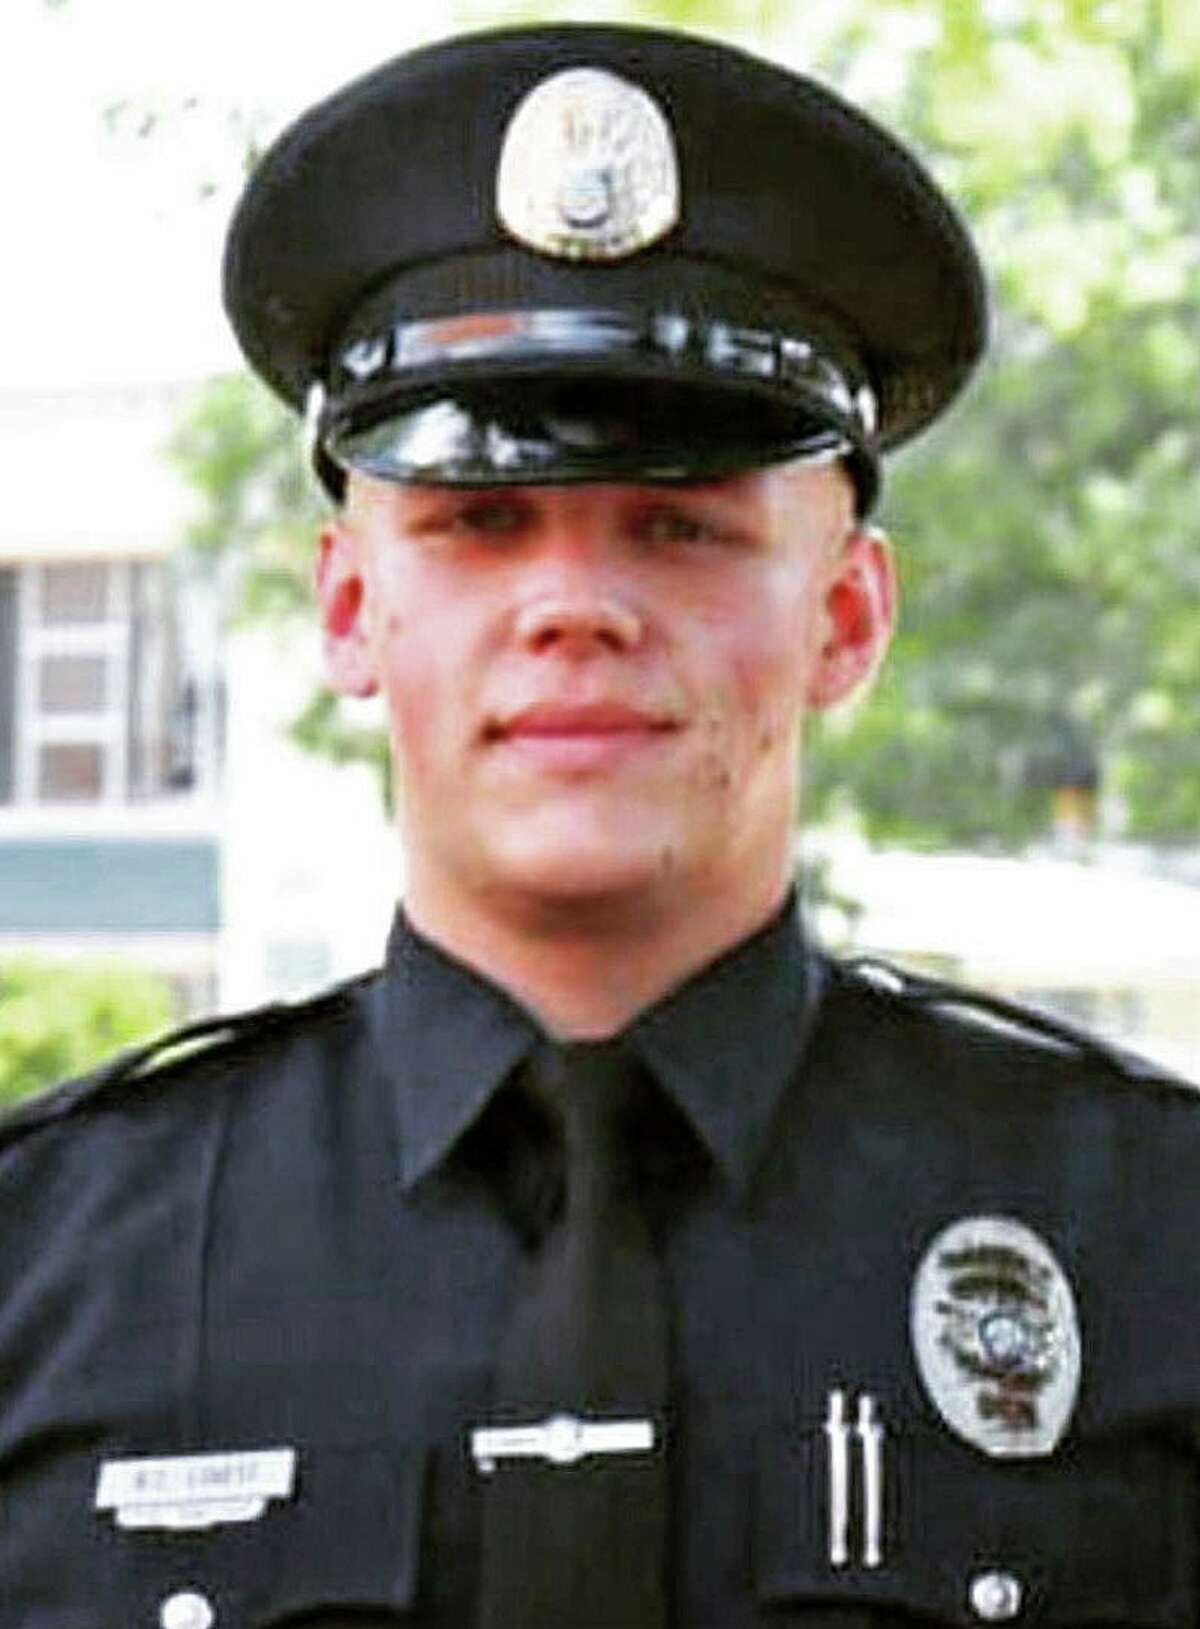 The driver convicted of fatally injuring 25-year-old South Windsor police officer Ben Lovett in a June 2021 motorcycle crash was sentenced to 11 years in prison followed by five years of probation Thursday, according to police.